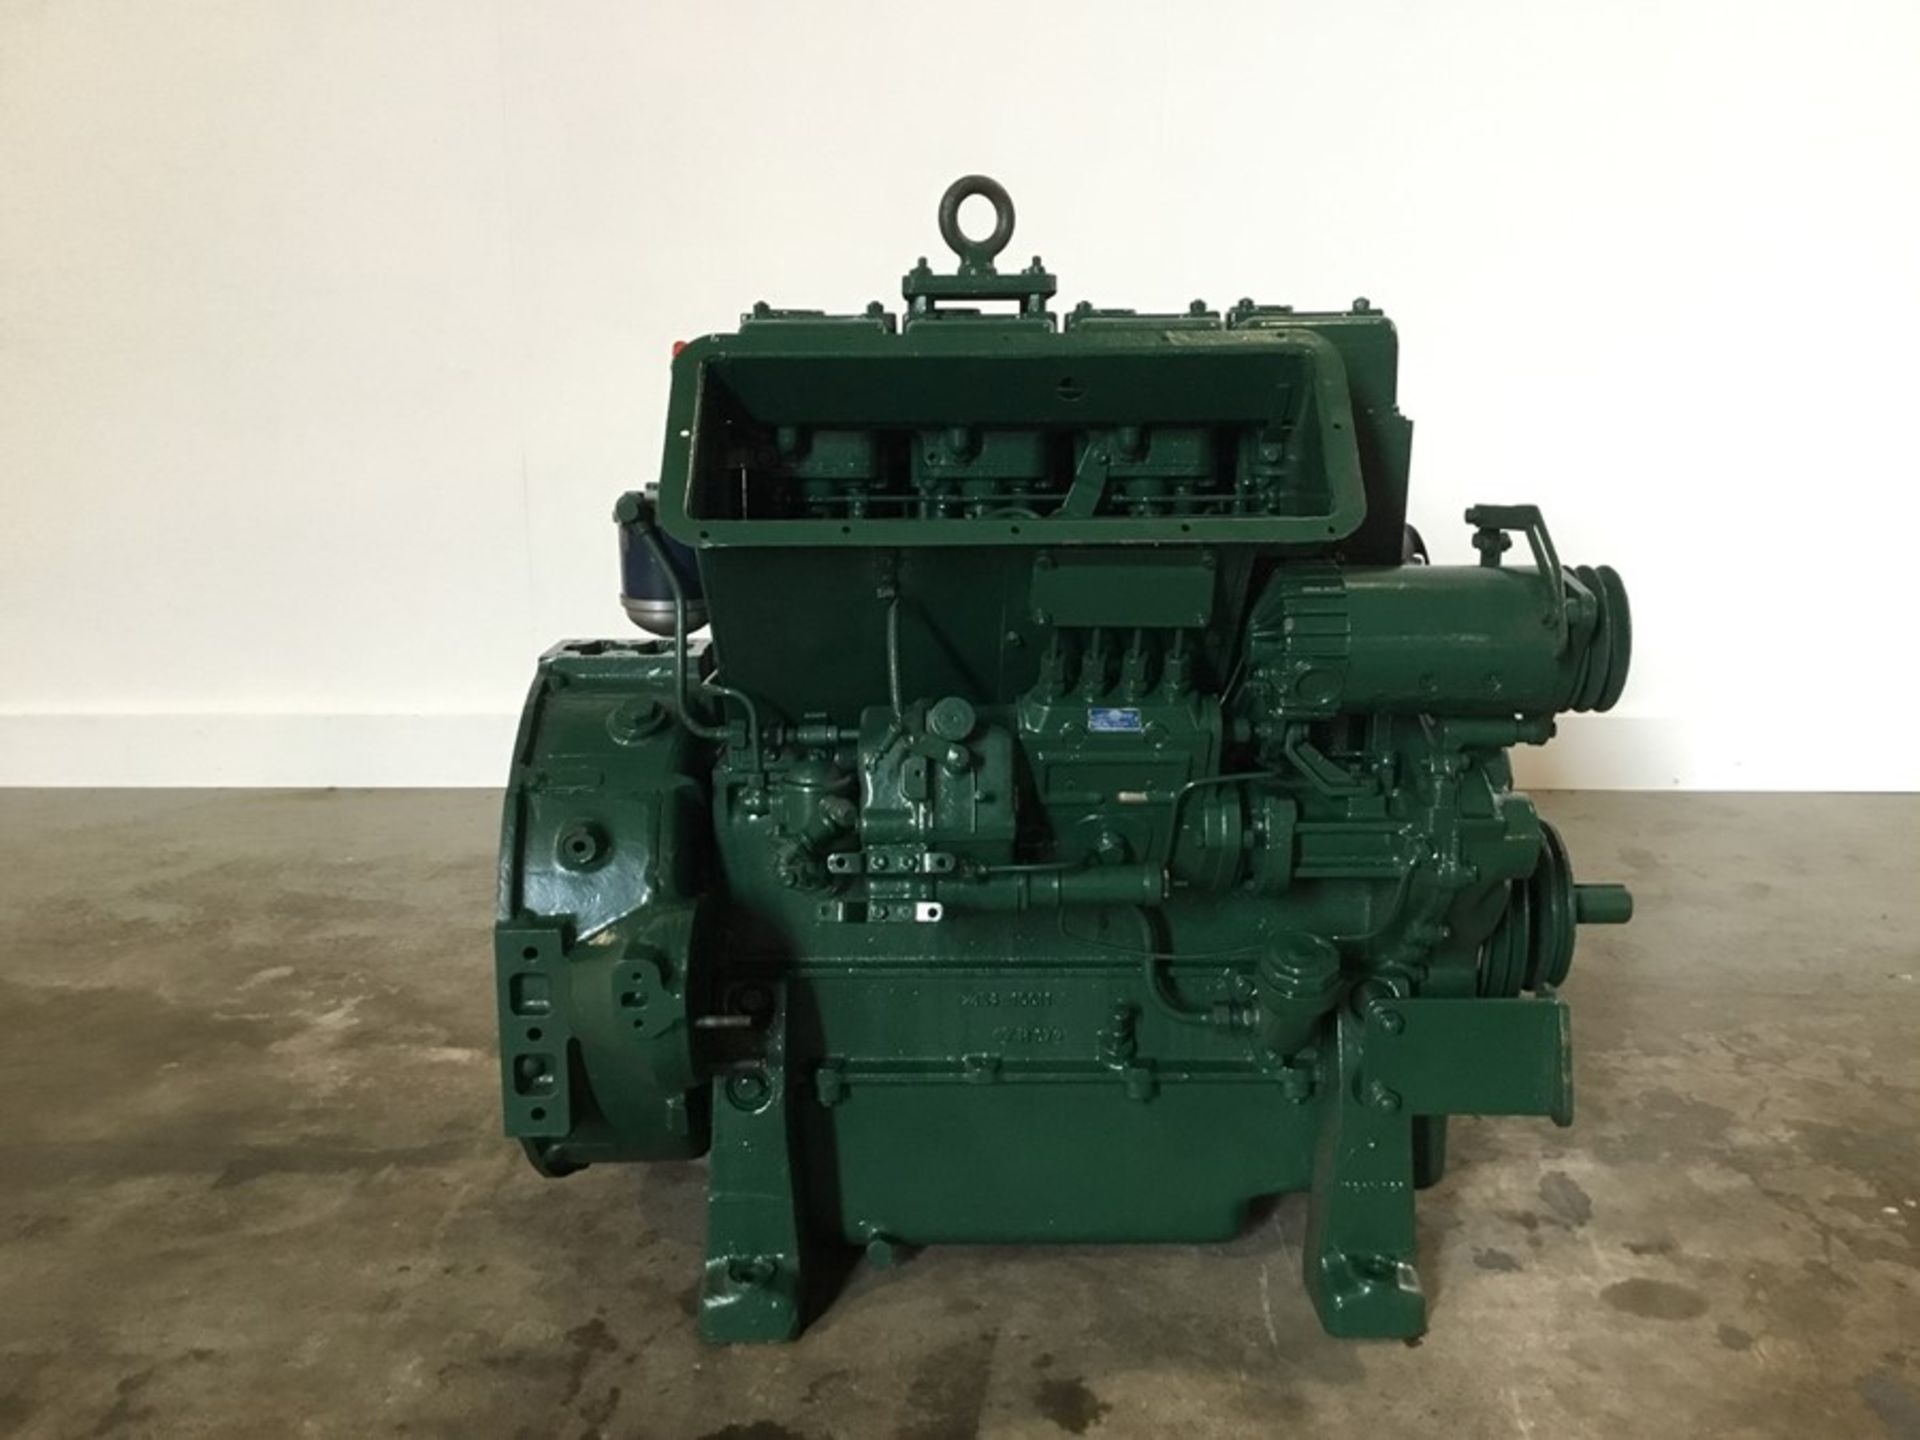 Lister 4cyl Diesel Engine: Lister 4cyl non turbo low hours - Image 13 of 18